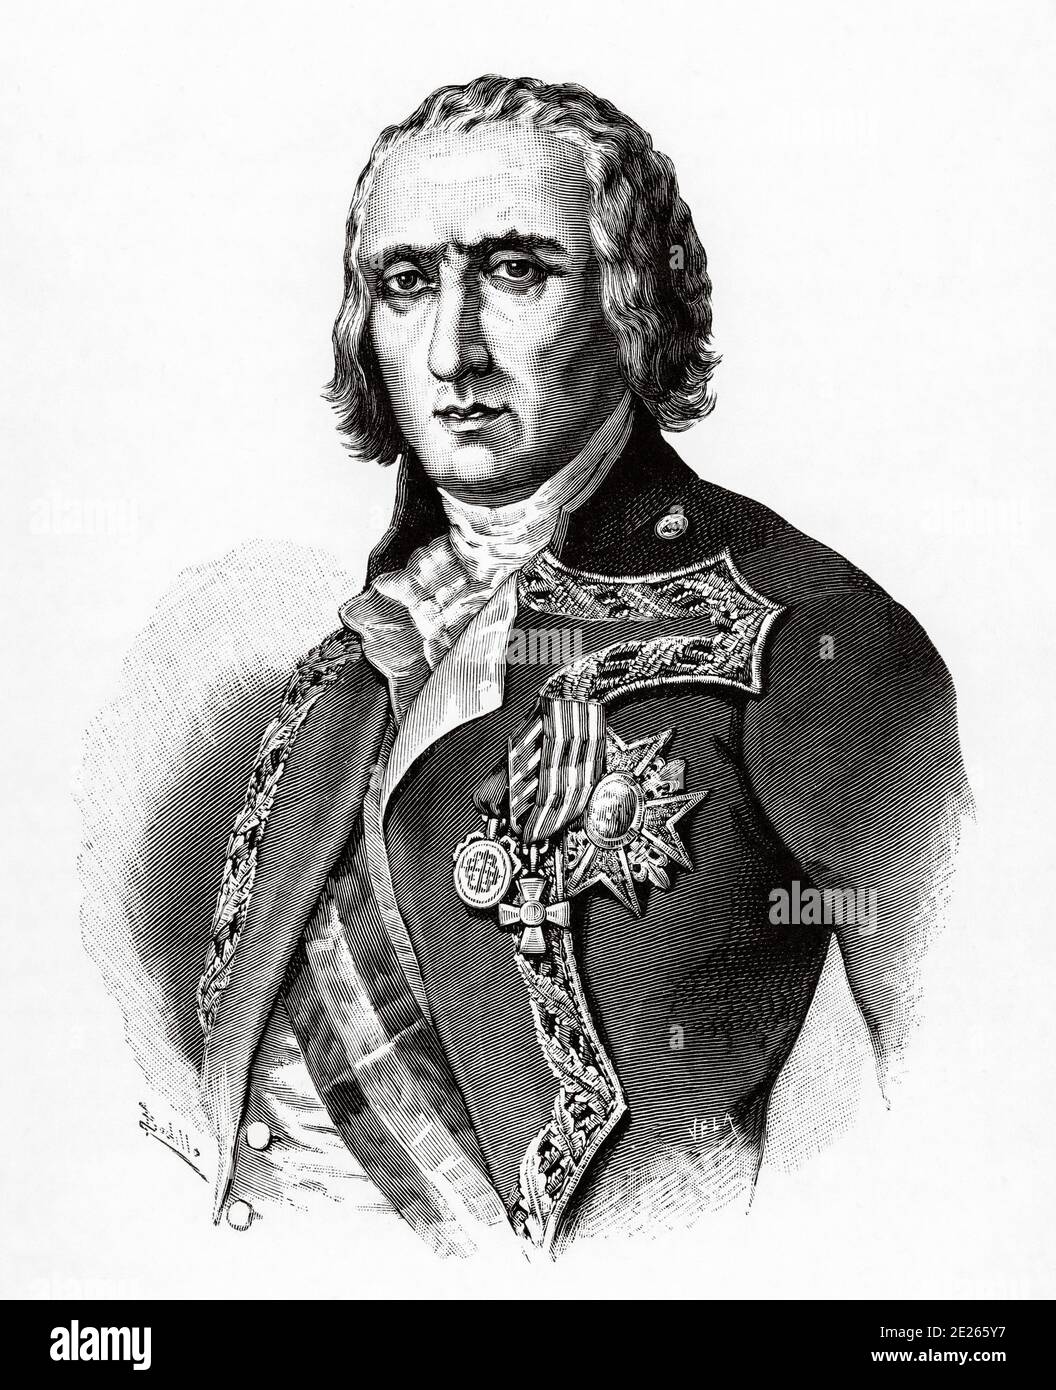 Portrait of José Ramón de Urrutia and de las Casas (Zalla, Vizcaya November 19, 1739 - Madrid, March 1, 1803). Spanish military who stood out especially in the reign of Carlos IV. Commander of the Order of Calatrava, knight of the fourth class of the Order of St. George of Russia, knight with cross of the Order of Charles III, and captain general of the Royal Armies. Engraving from Historia del Reinado de Carlos IV 1890 Stock Photo